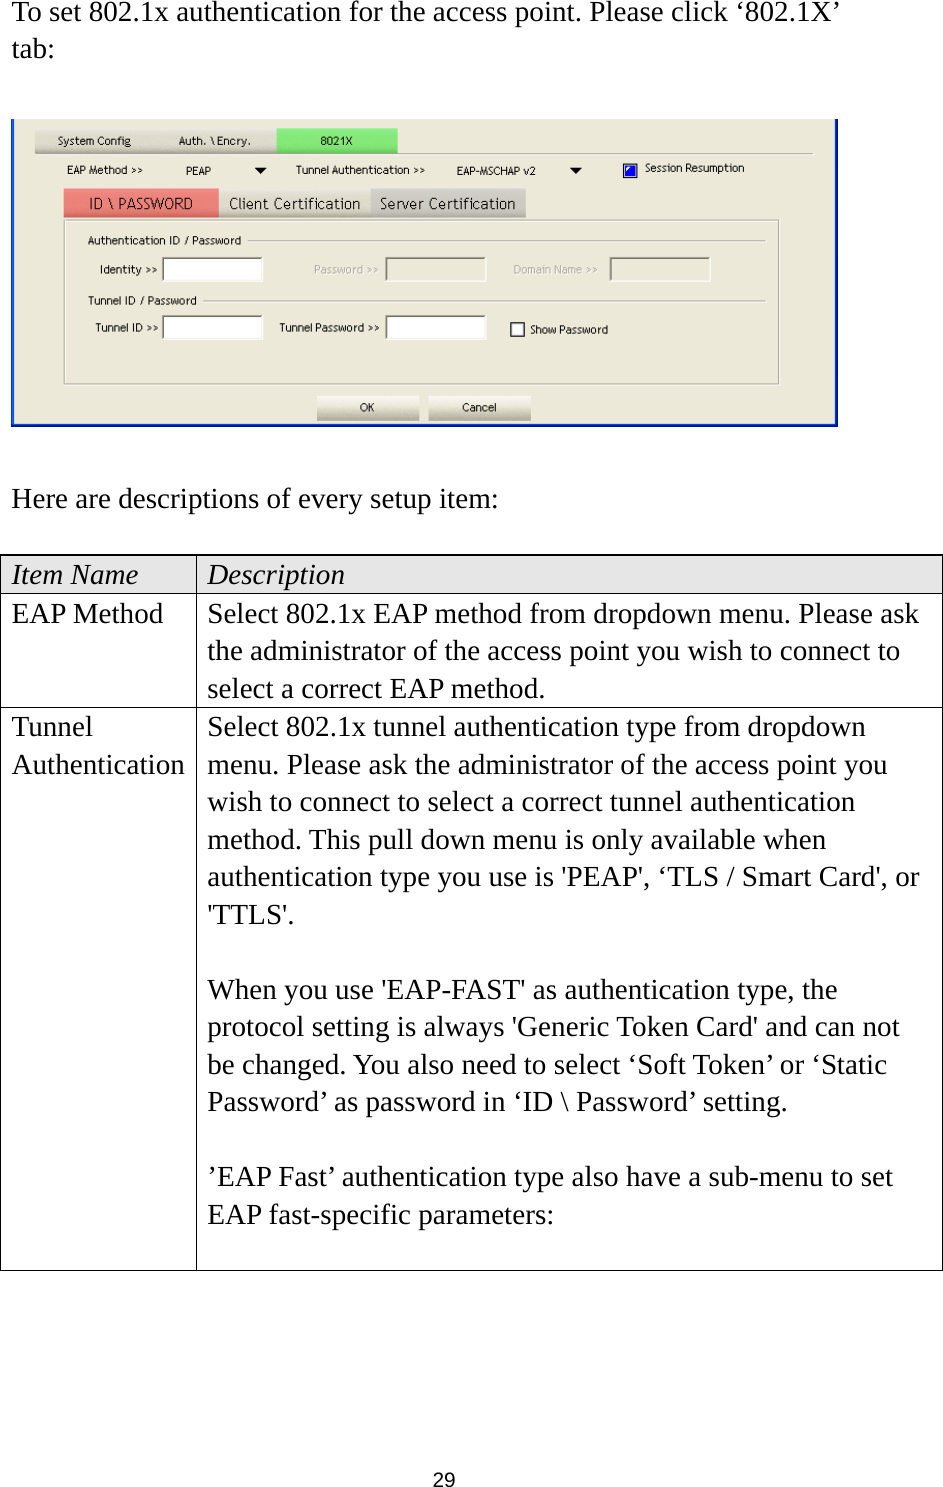  29 To set 802.1x authentication for the access point. Please click ‘802.1X’ tab:    Here are descriptions of every setup item:  Item Name  Description EAP Method  Select 802.1x EAP method from dropdown menu. Please ask the administrator of the access point you wish to connect to select a correct EAP method. Tunnel Authentication Select 802.1x tunnel authentication type from dropdown menu. Please ask the administrator of the access point you wish to connect to select a correct tunnel authentication method. This pull down menu is only available when authentication type you use is &apos;PEAP&apos;, ‘TLS / Smart Card&apos;, or &apos;TTLS&apos;.   When you use &apos;EAP-FAST&apos; as authentication type, the protocol setting is always &apos;Generic Token Card&apos; and can not be changed. You also need to select ‘Soft Token’ or ‘Static Password’ as password in ‘ID \ Password’ setting.  ’EAP Fast’ authentication type also have a sub-menu to set EAP fast-specific parameters:  